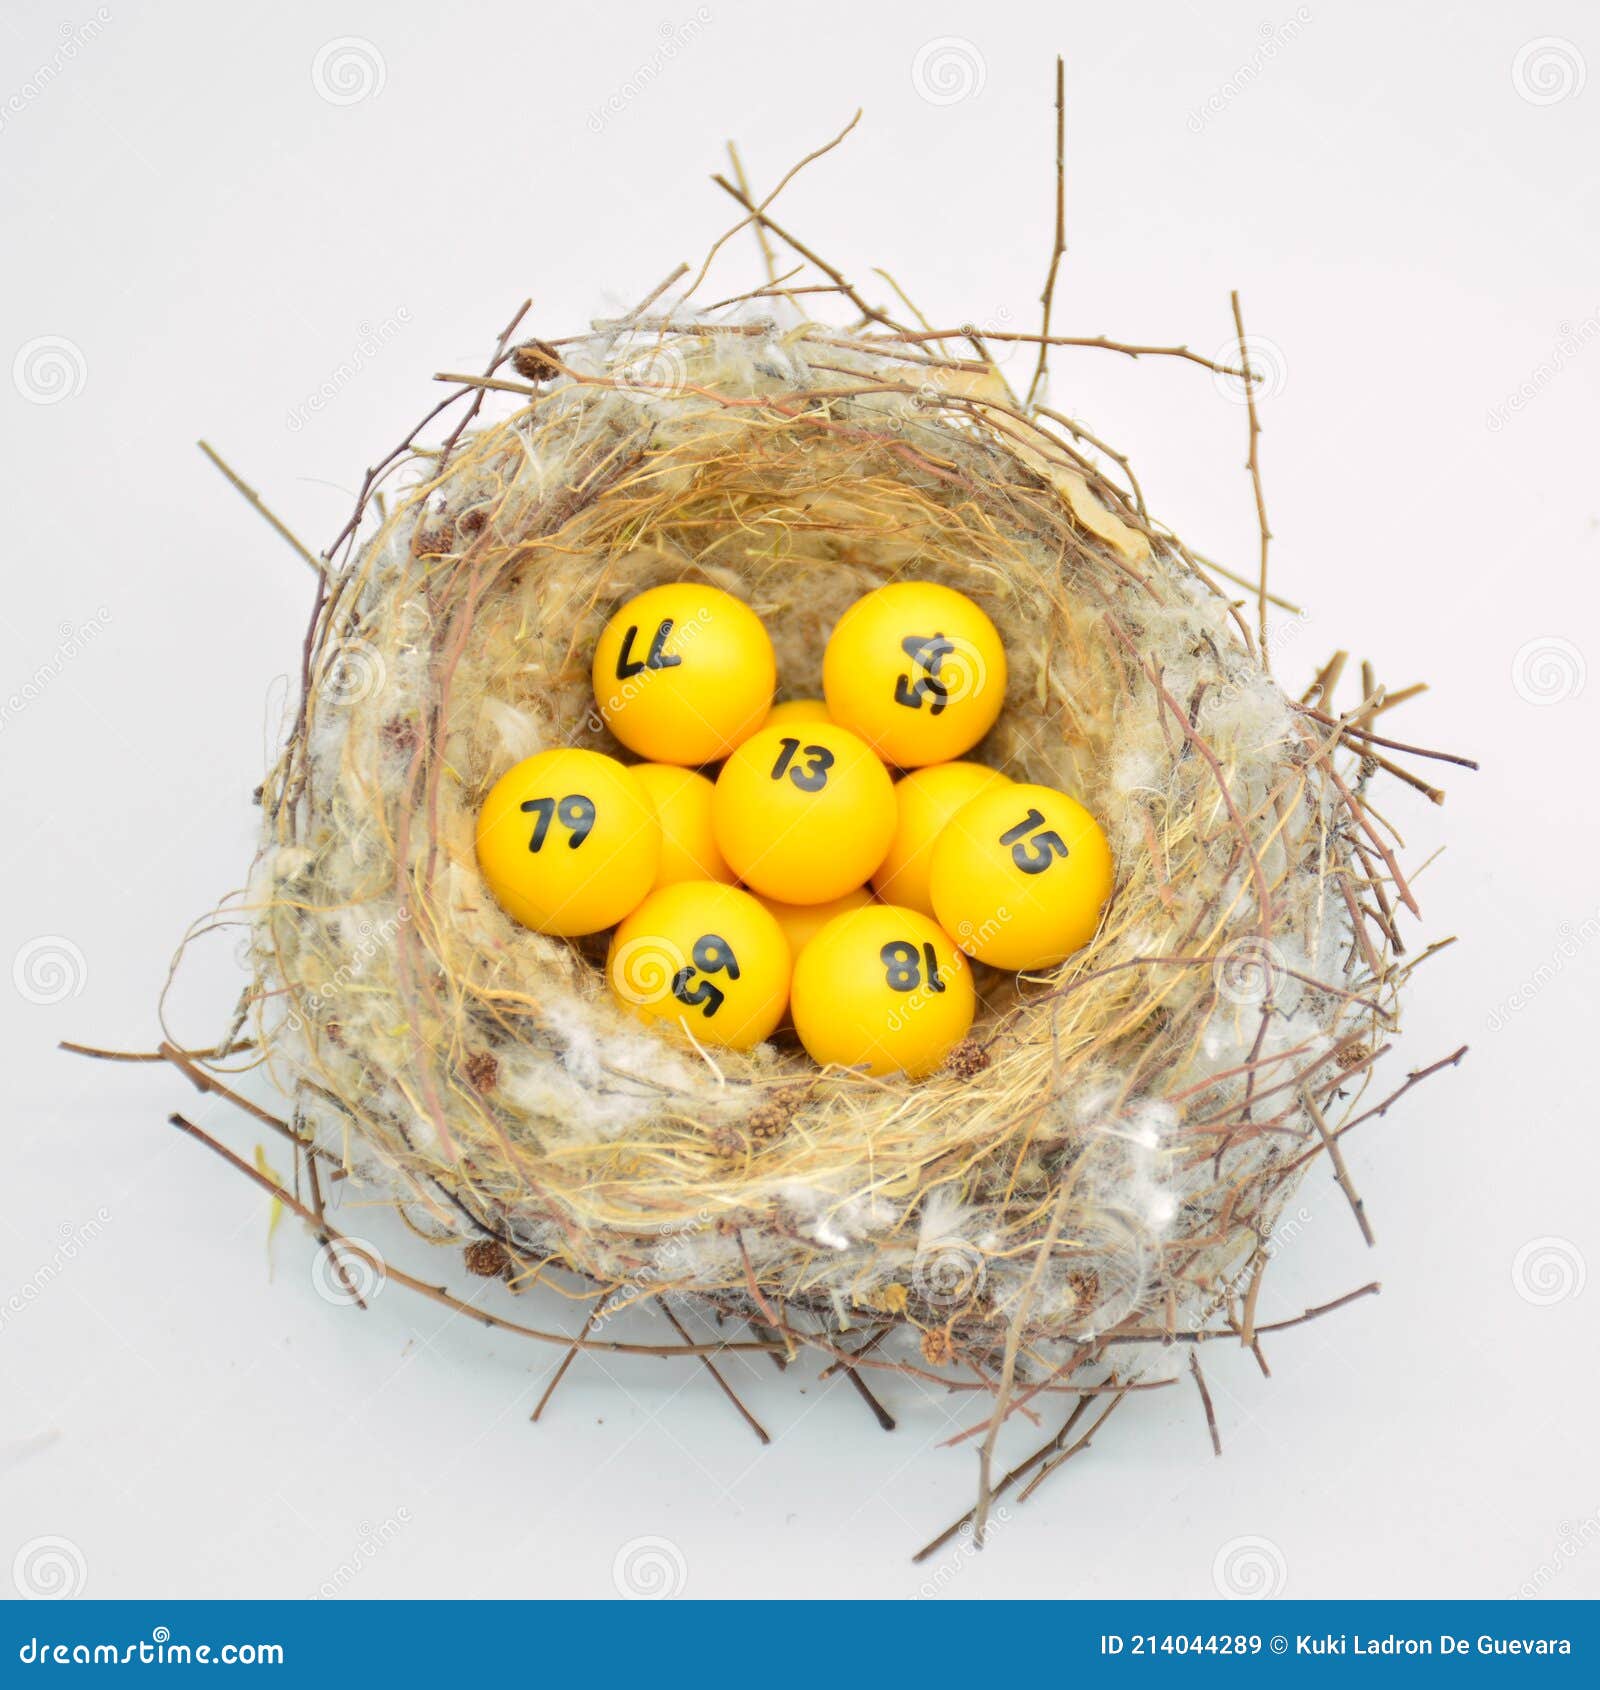 lottery balls in a nest